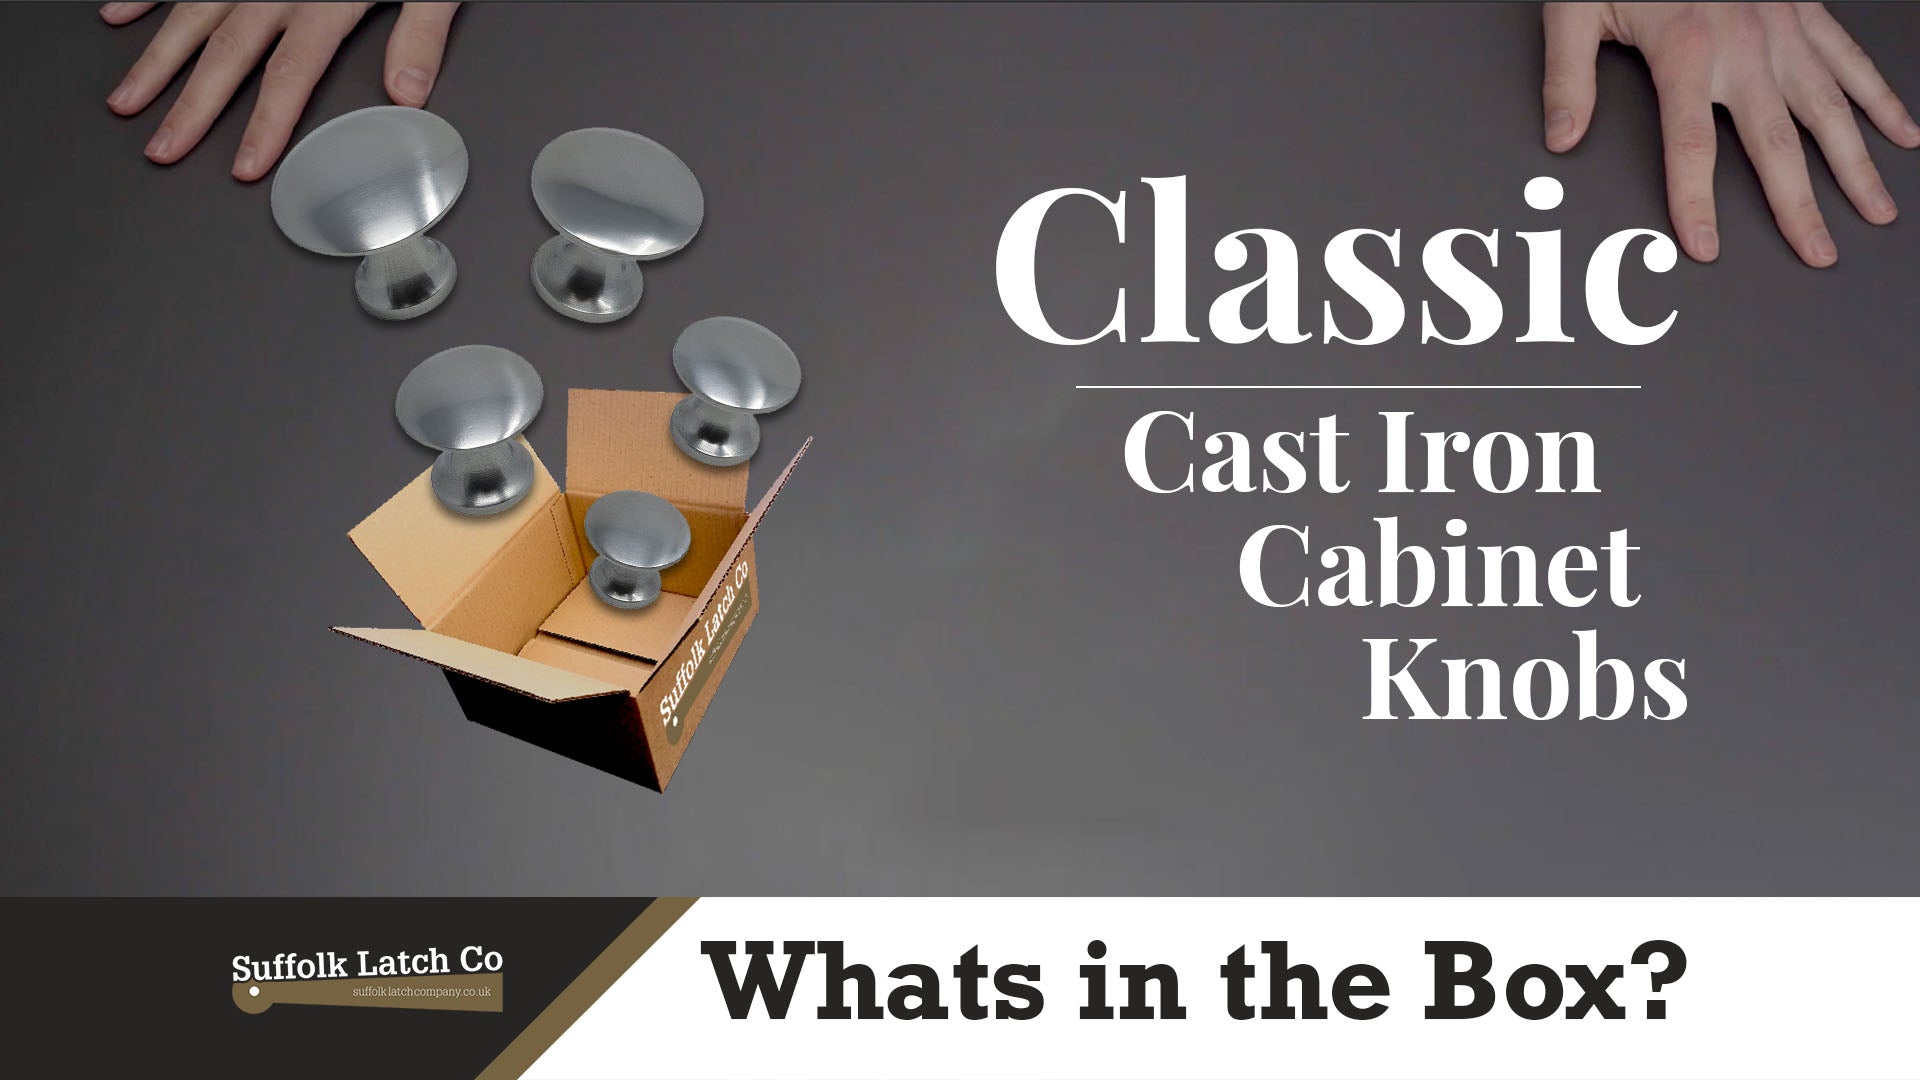 What's In The Box: Cast Iron Classic Cabinet Knobs